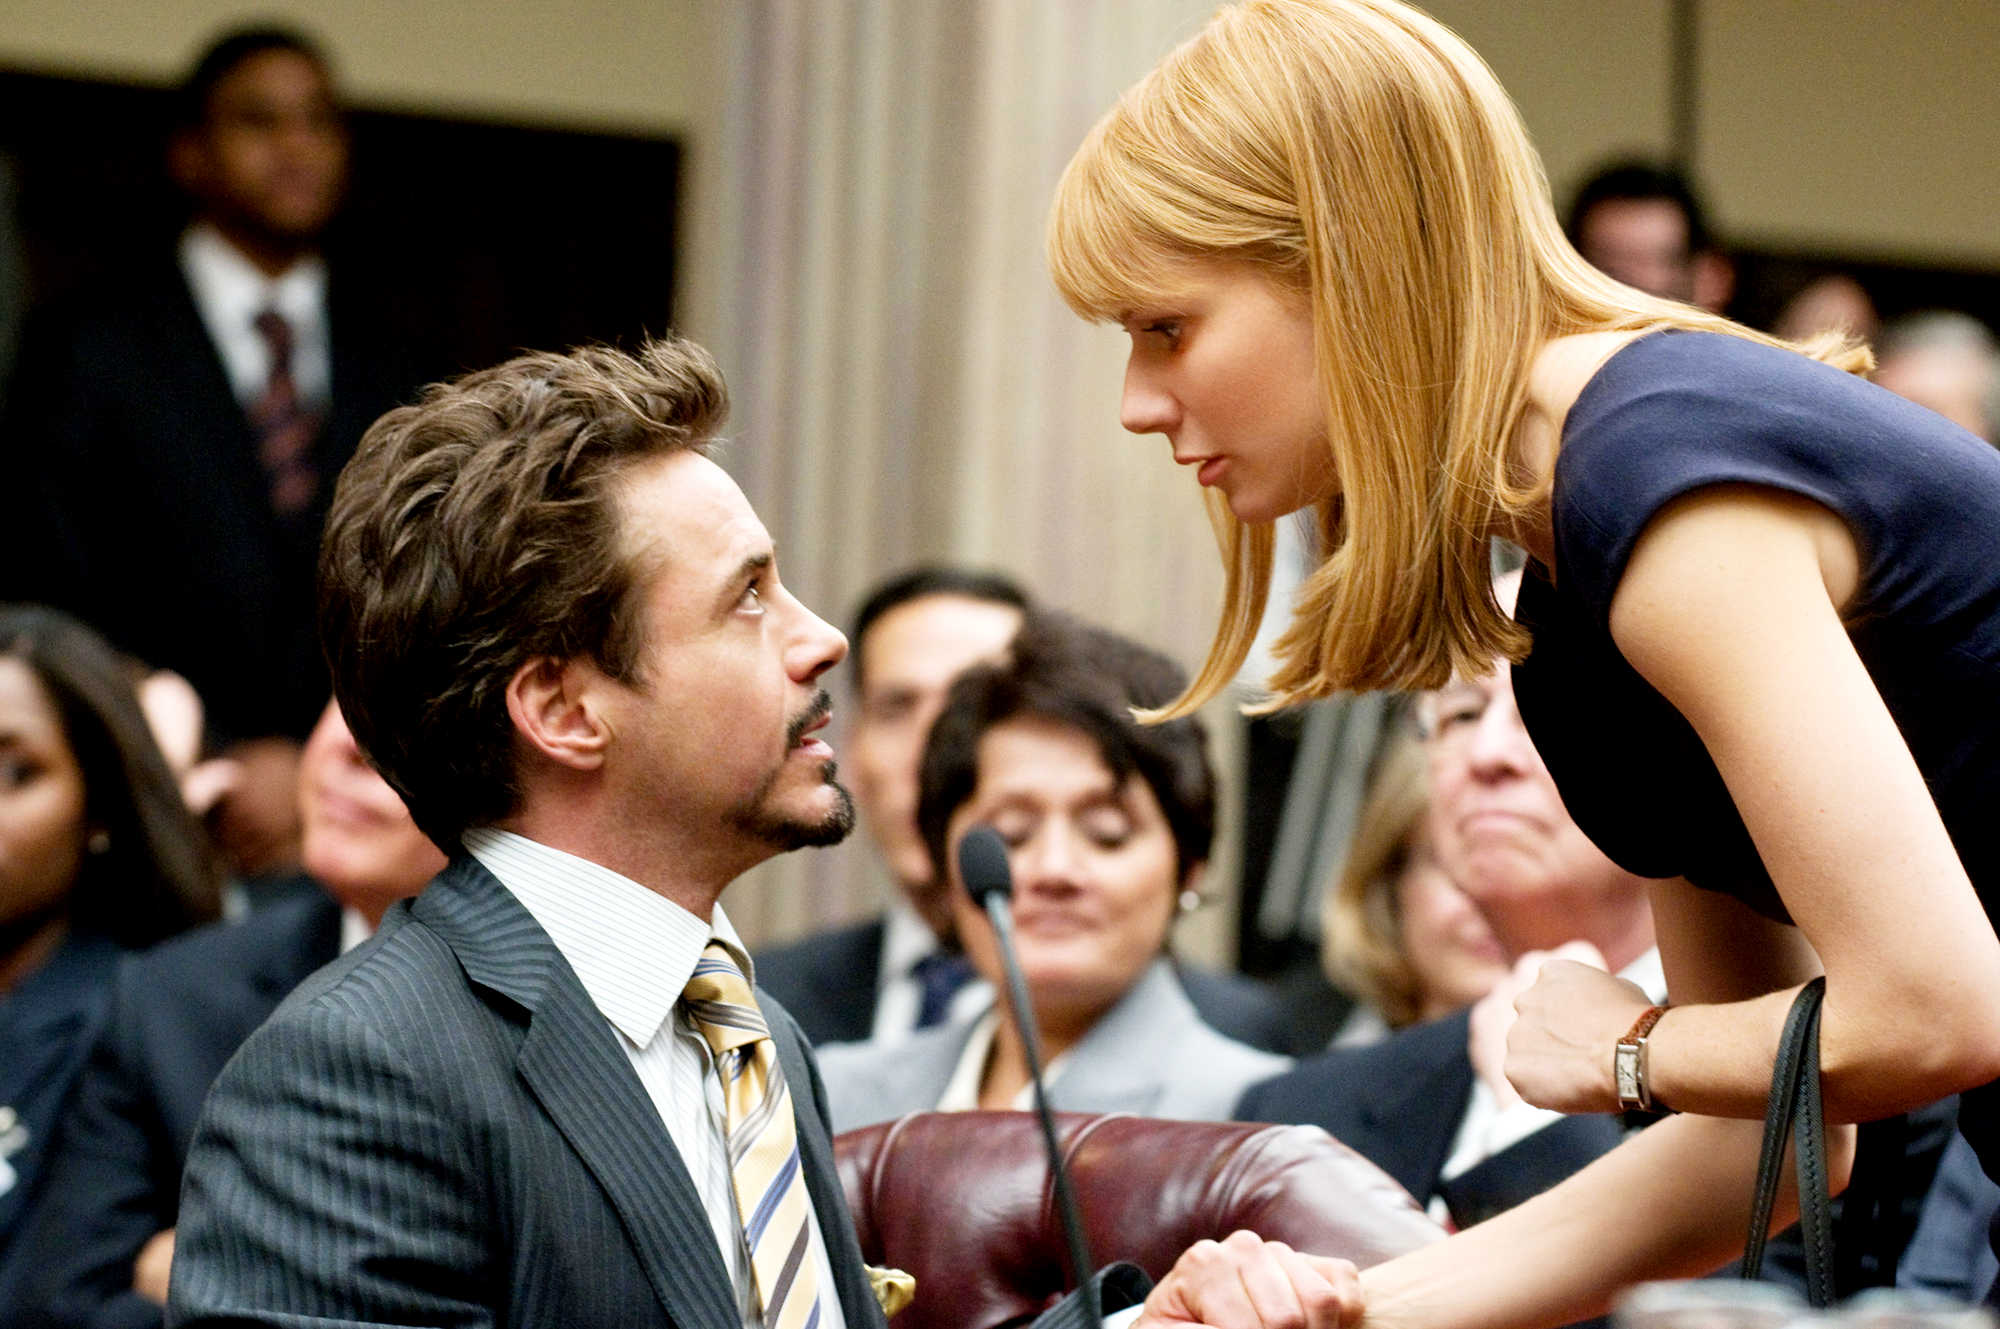 Robert Downey Jr. stars as Tony Stark/Iron Man and Gwyneth Paltrow stars as Pepper Potts in Paramount Pictures' Iron Man 2 (2010). Photo credit by Merrick Morton.